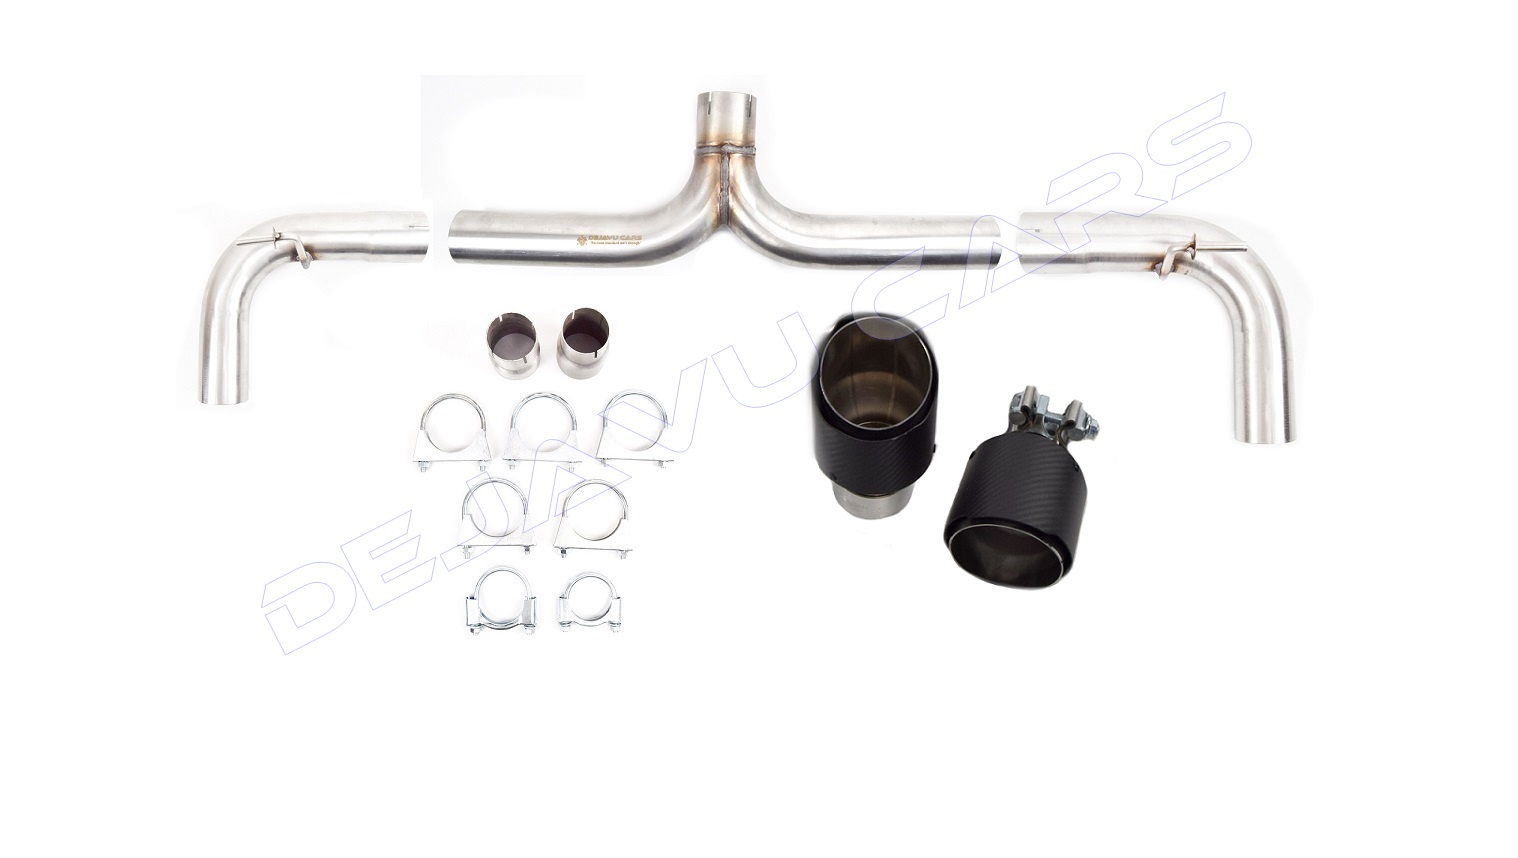 GTI Look Sport Exhaust System + Diffuser for VW Golf 7 / GTI & GTD